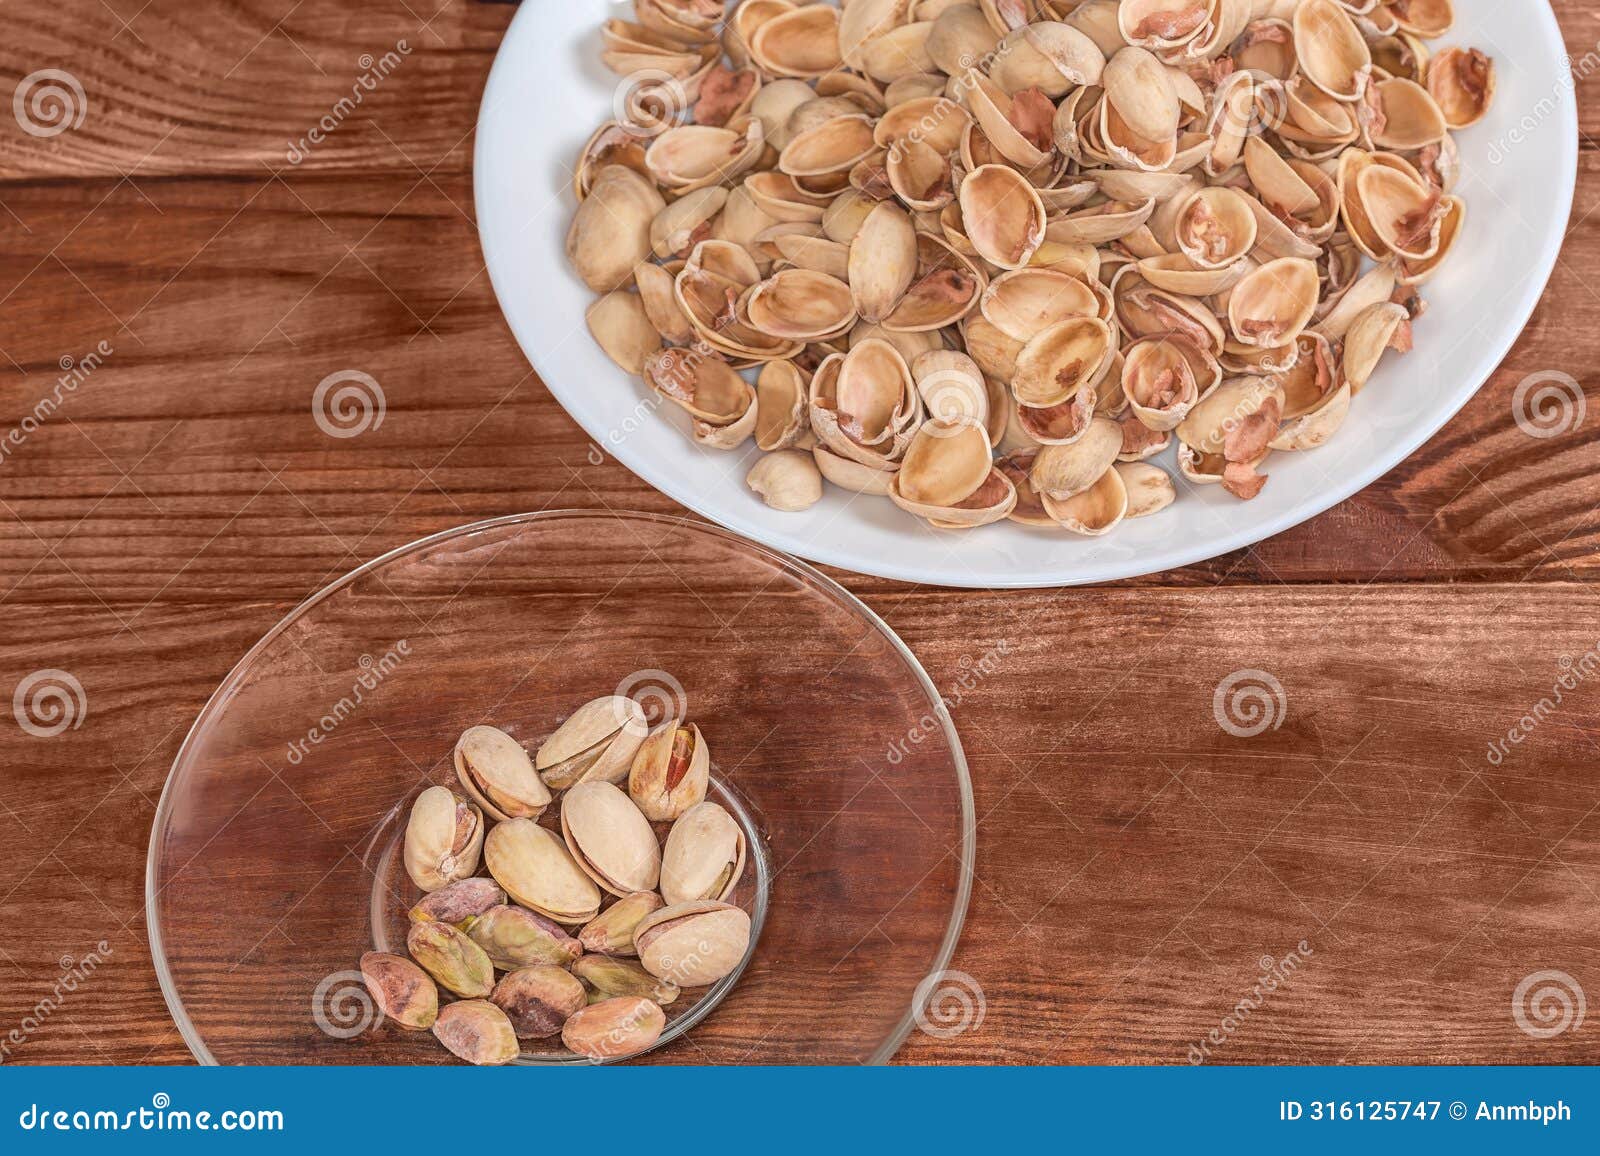 partly peeled pistachio nuts on saucer and separately empty shells